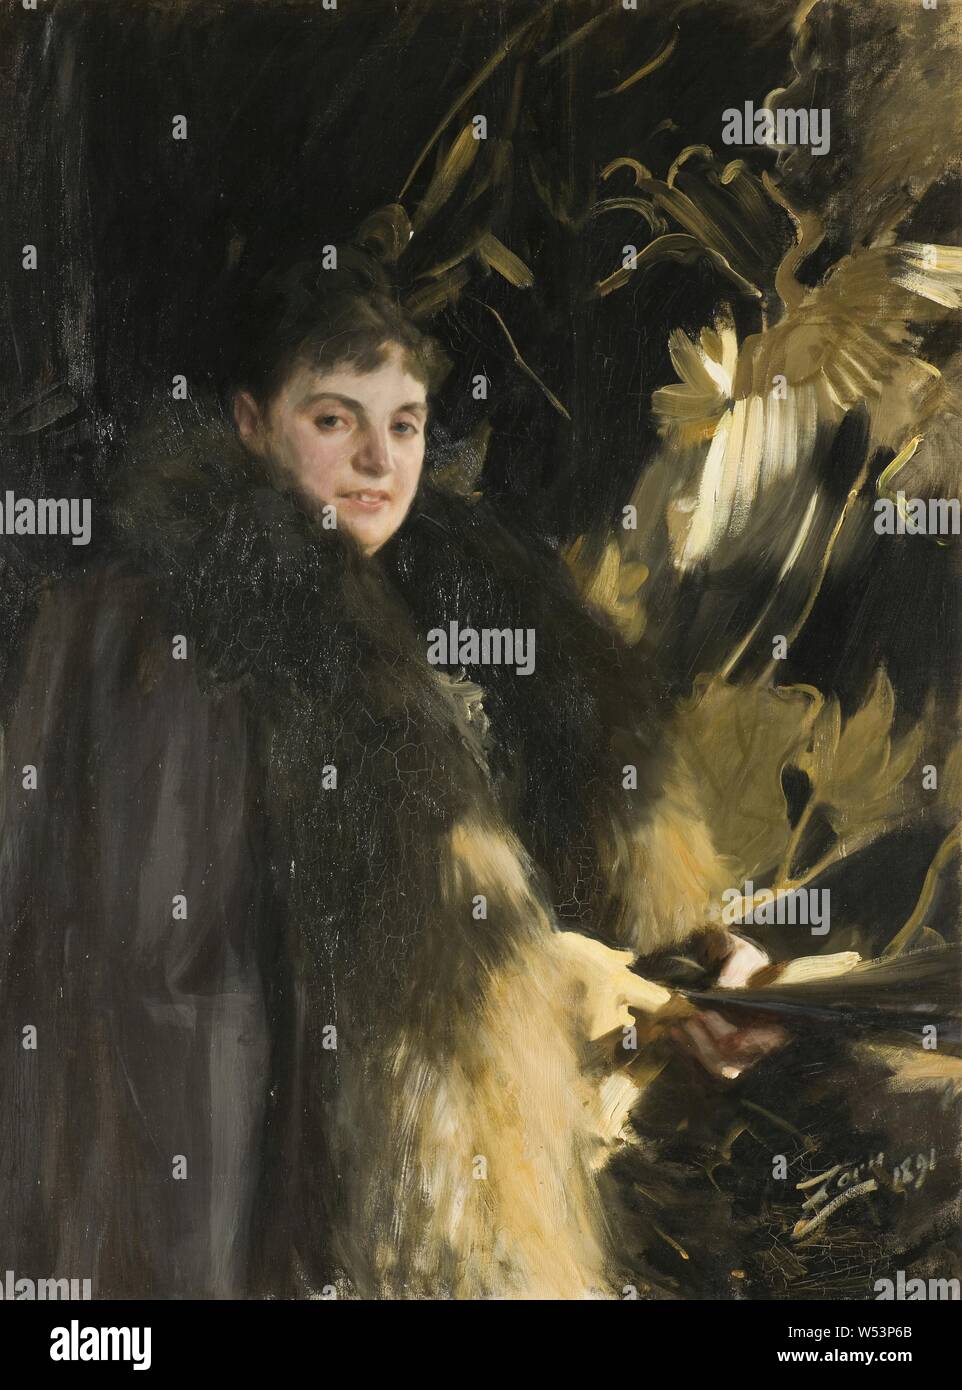 Anders Zorn, Veronica Heiss, Mrs. Veronica Heiss, painting, 1891, Oil on canvas, Height, 120 cm (47.2 inches), Width, 90 cm (35.4 inches), Signed, Zorn 1891 Stock Photo